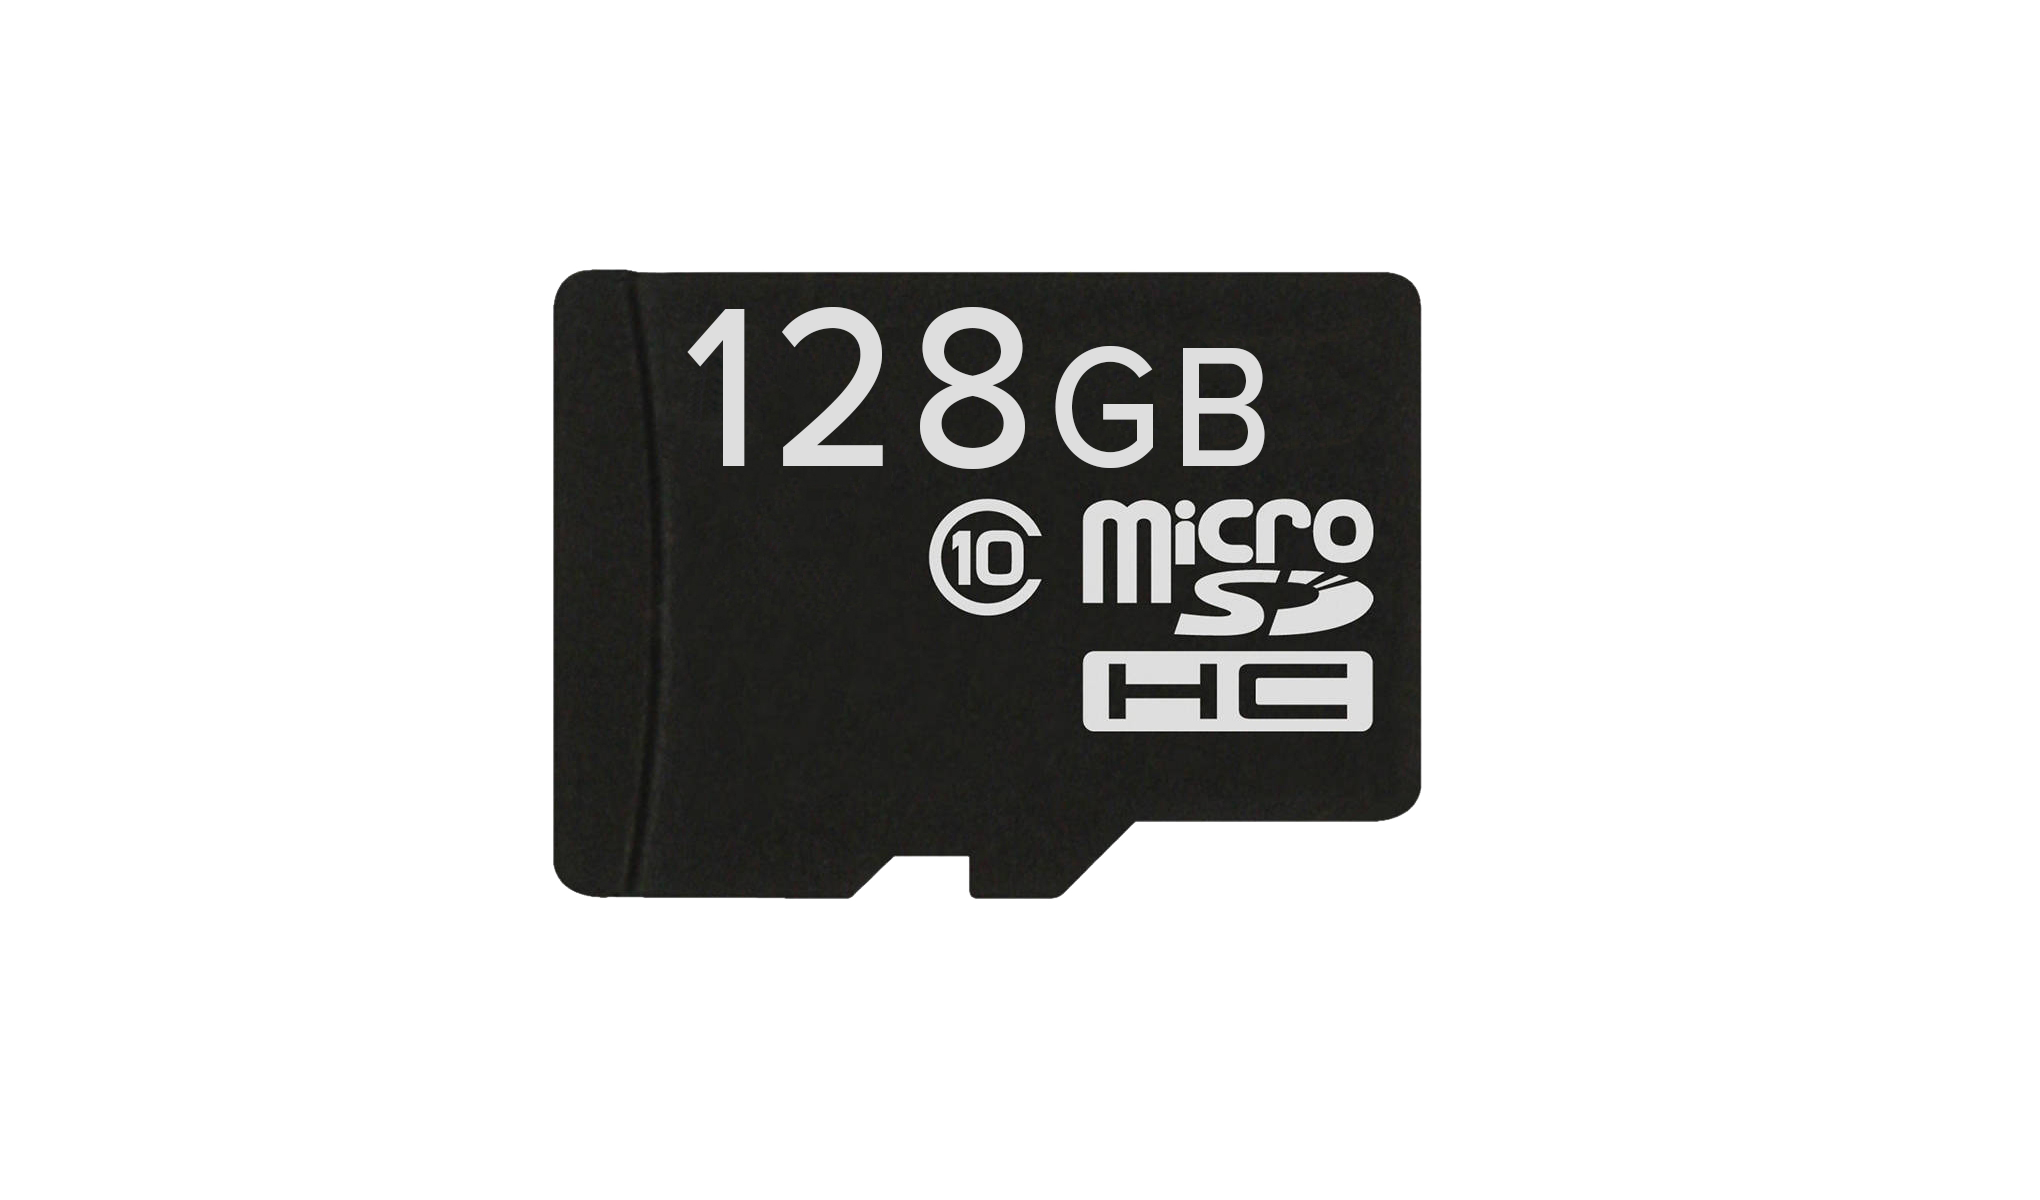 128GB MicroSD/TF Card for Smartphones,Tablets and Laptops